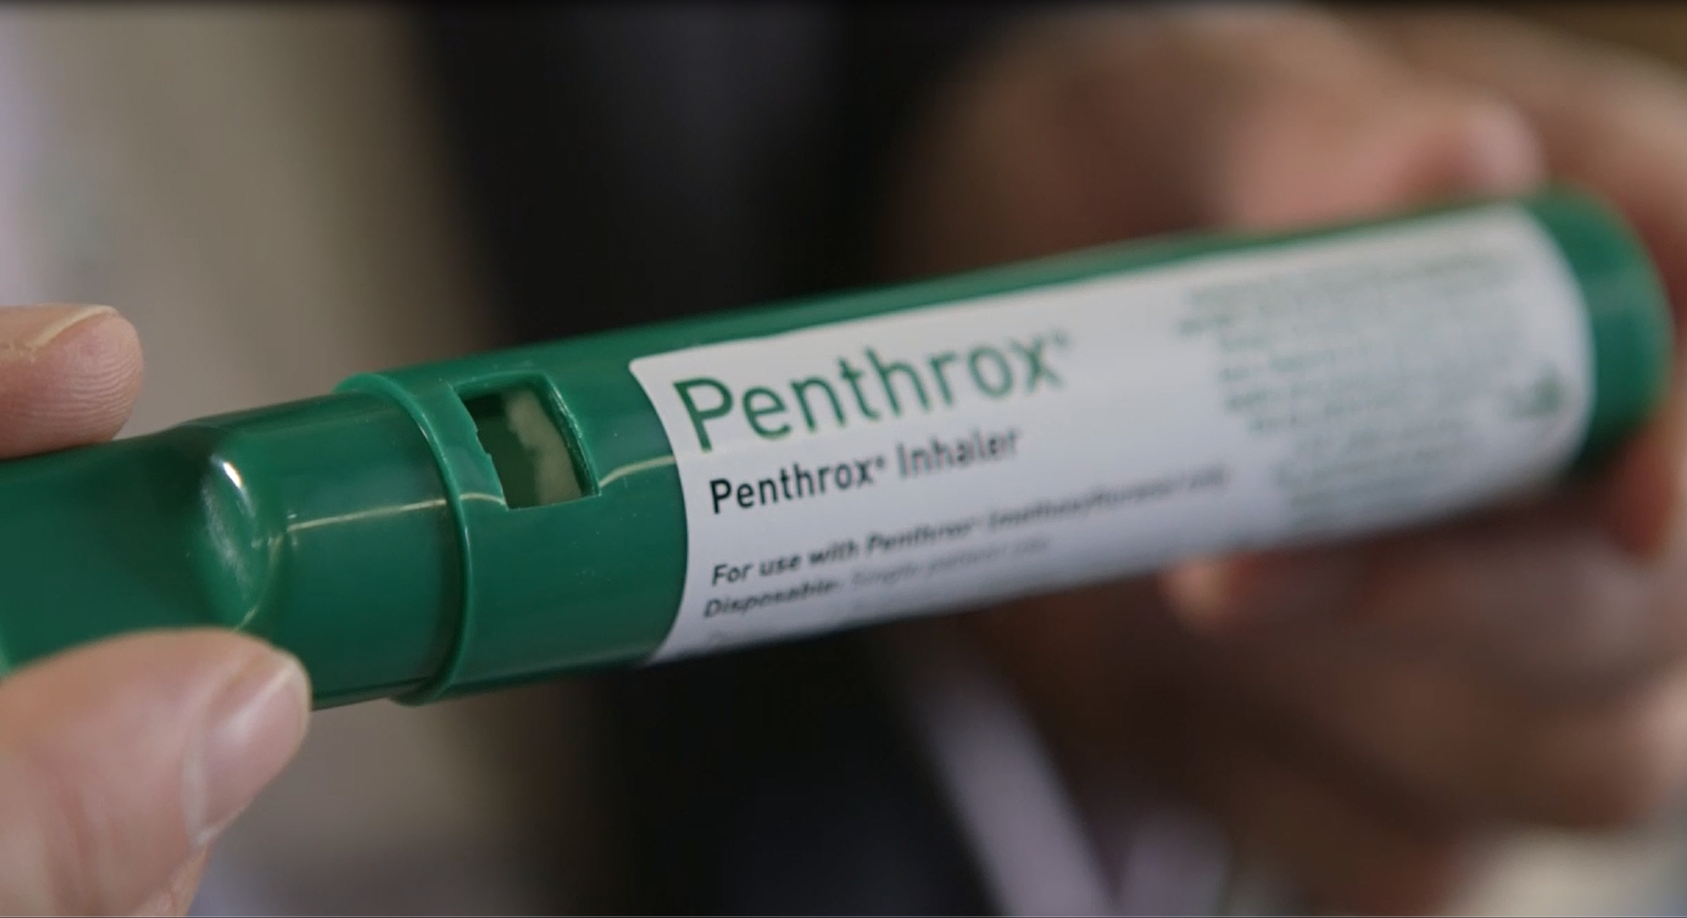 The Penthrox inhaler, nicknamed the ‘green whistle’, delivers immediate pain-relief .